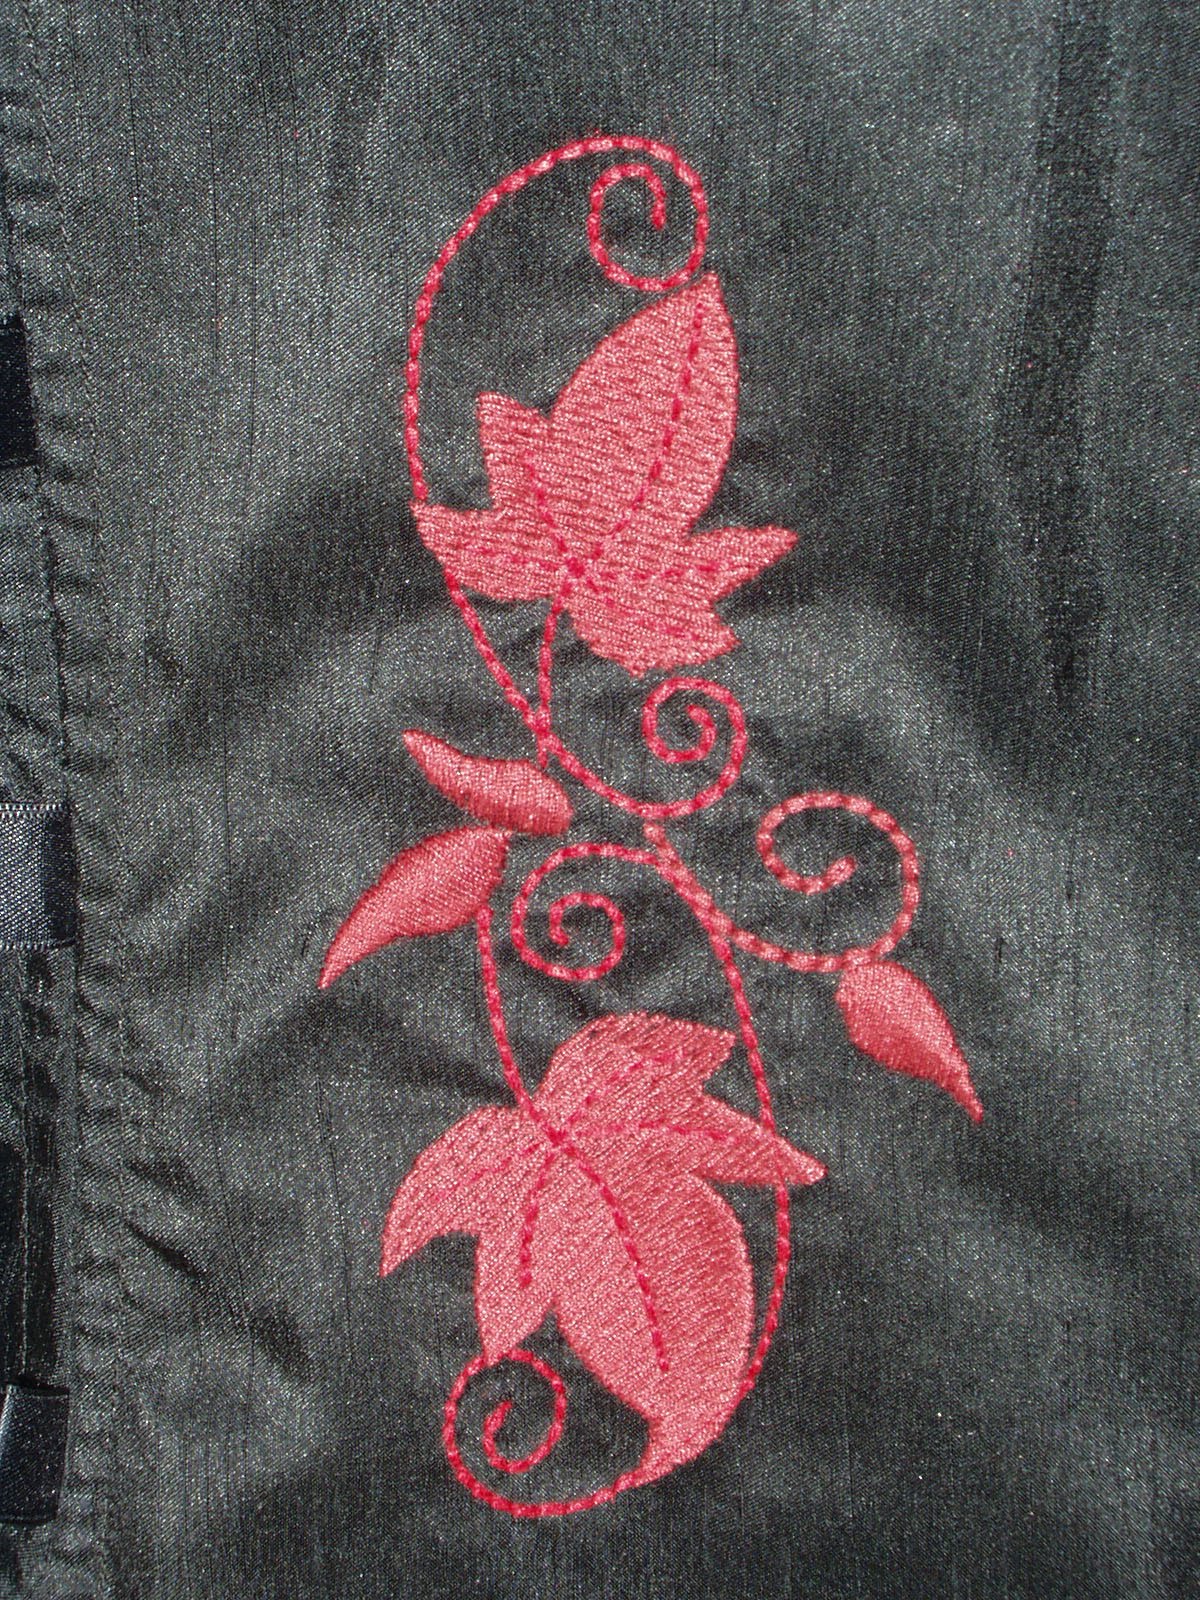 Embroidery fabric - which one do you need for different techniques?